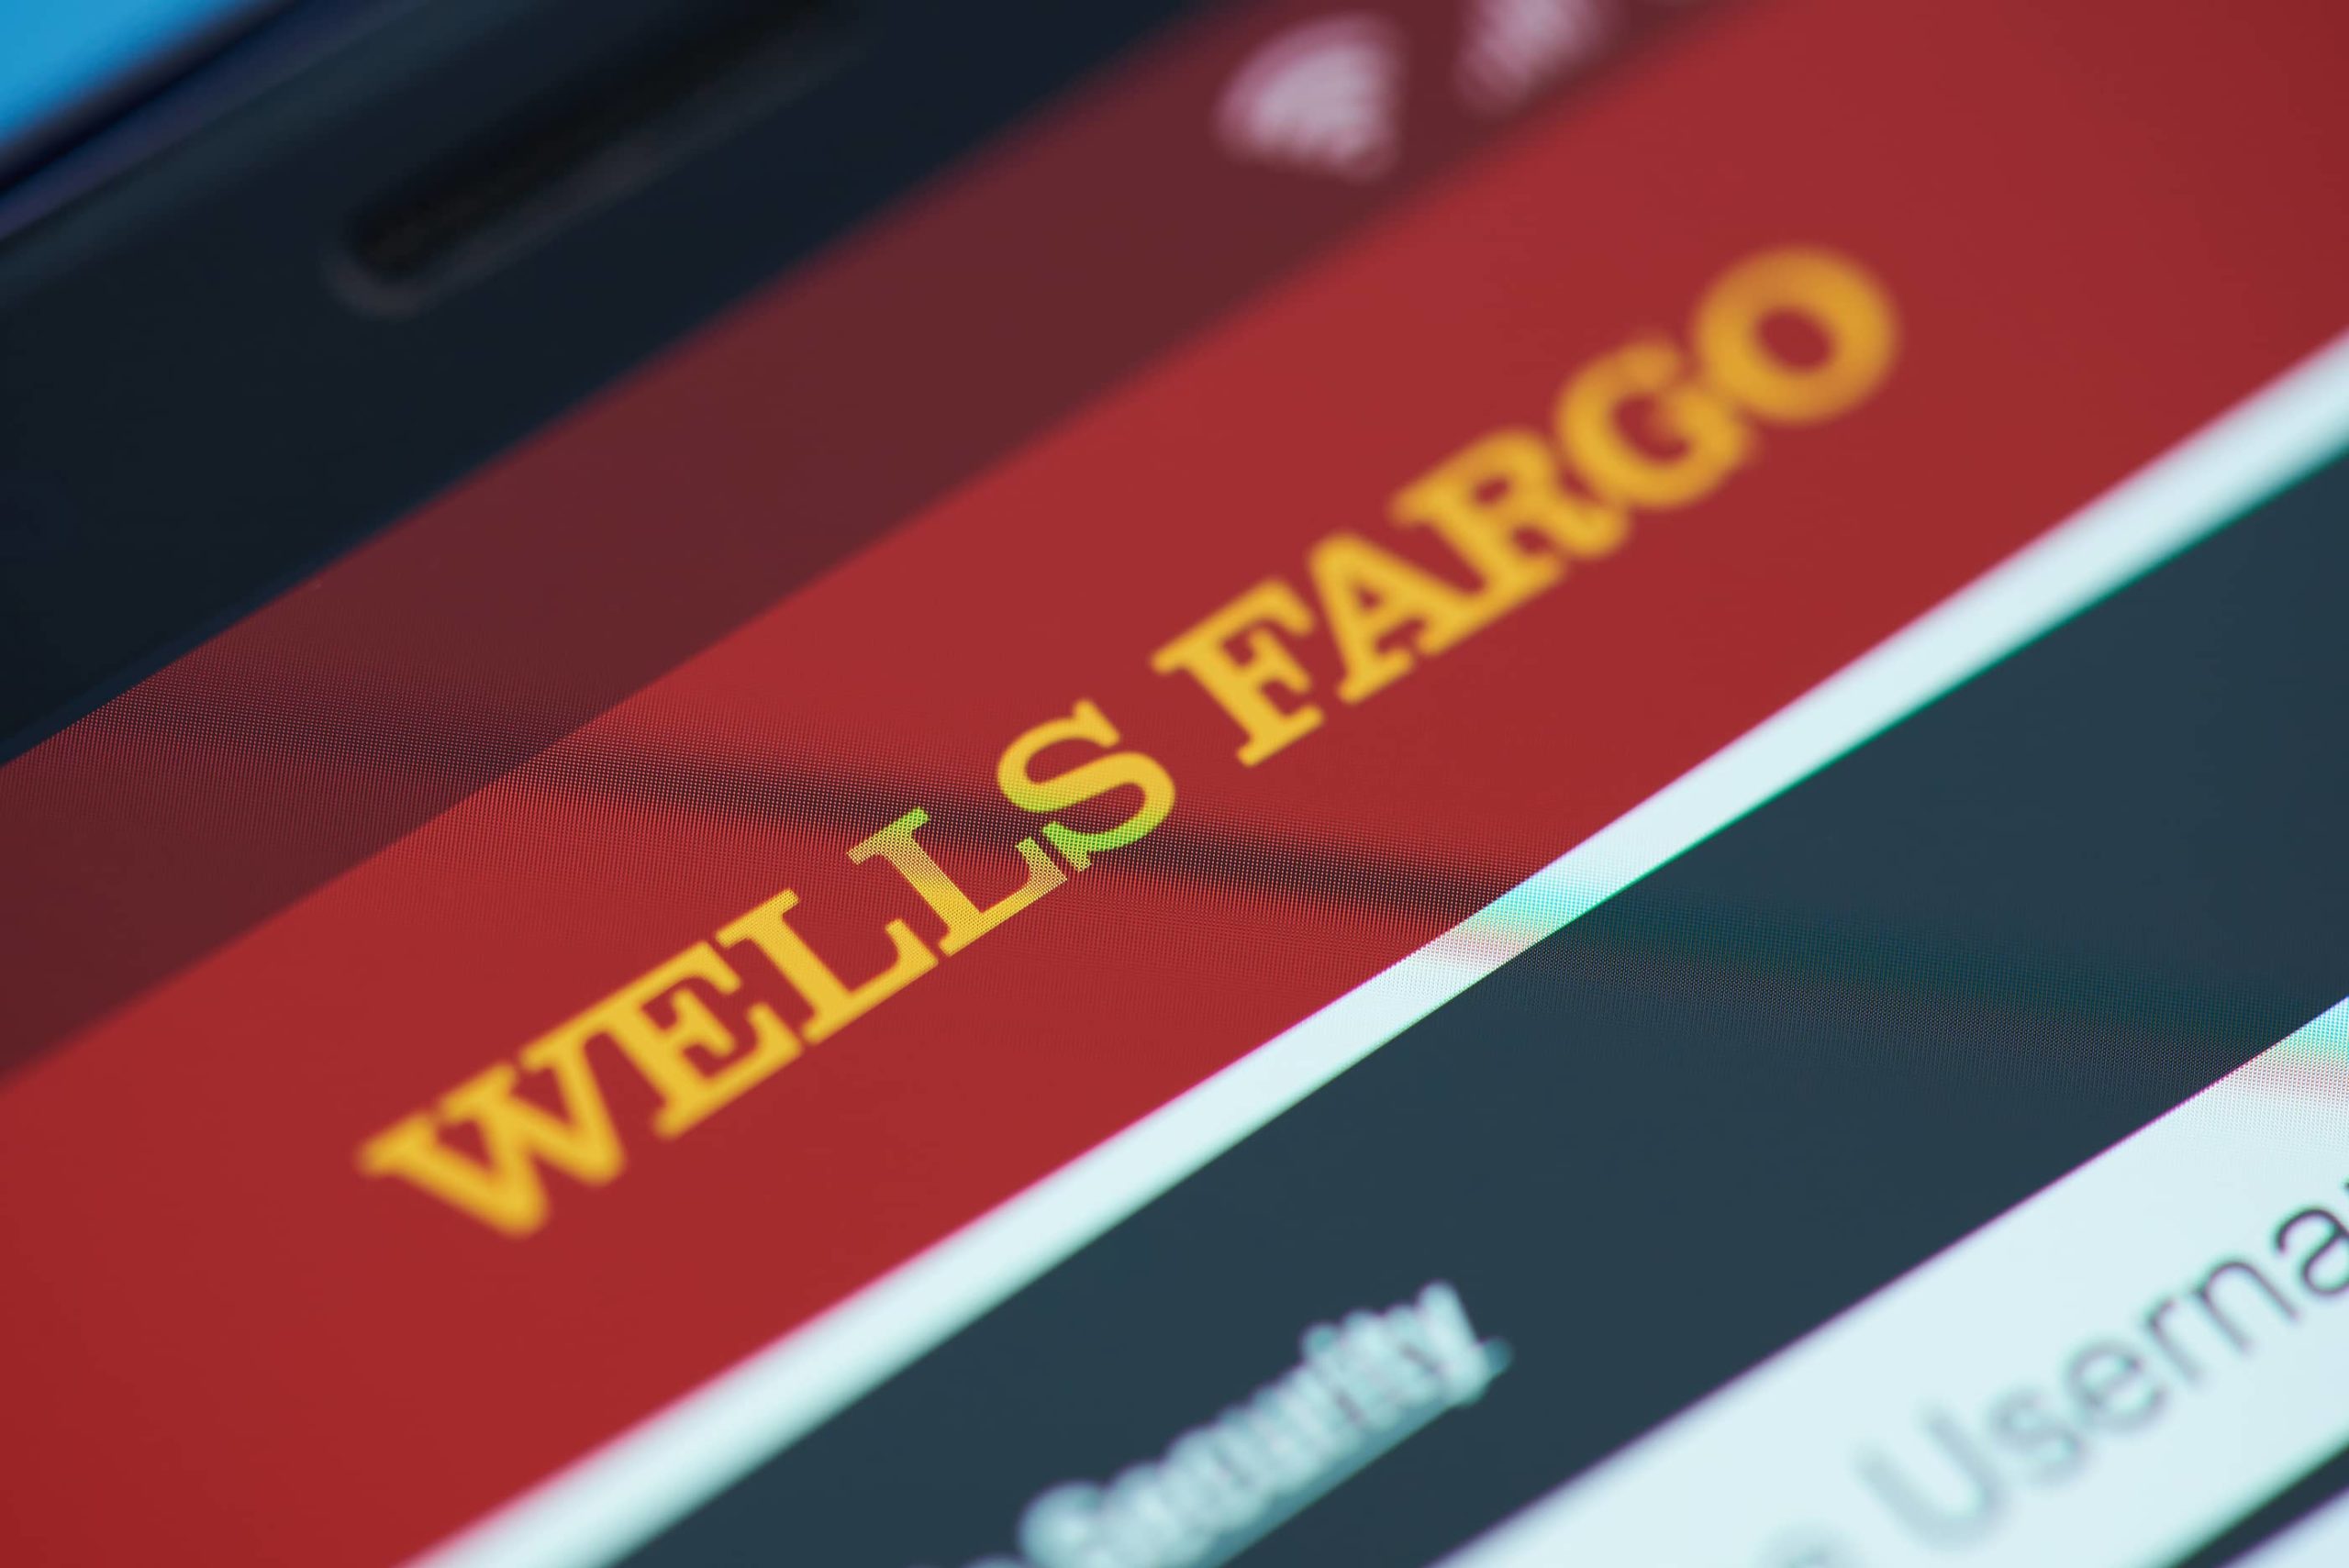 Wells Fargo Agrees to Settle Car Loan Class Action Lawsuit in California for $385 Million